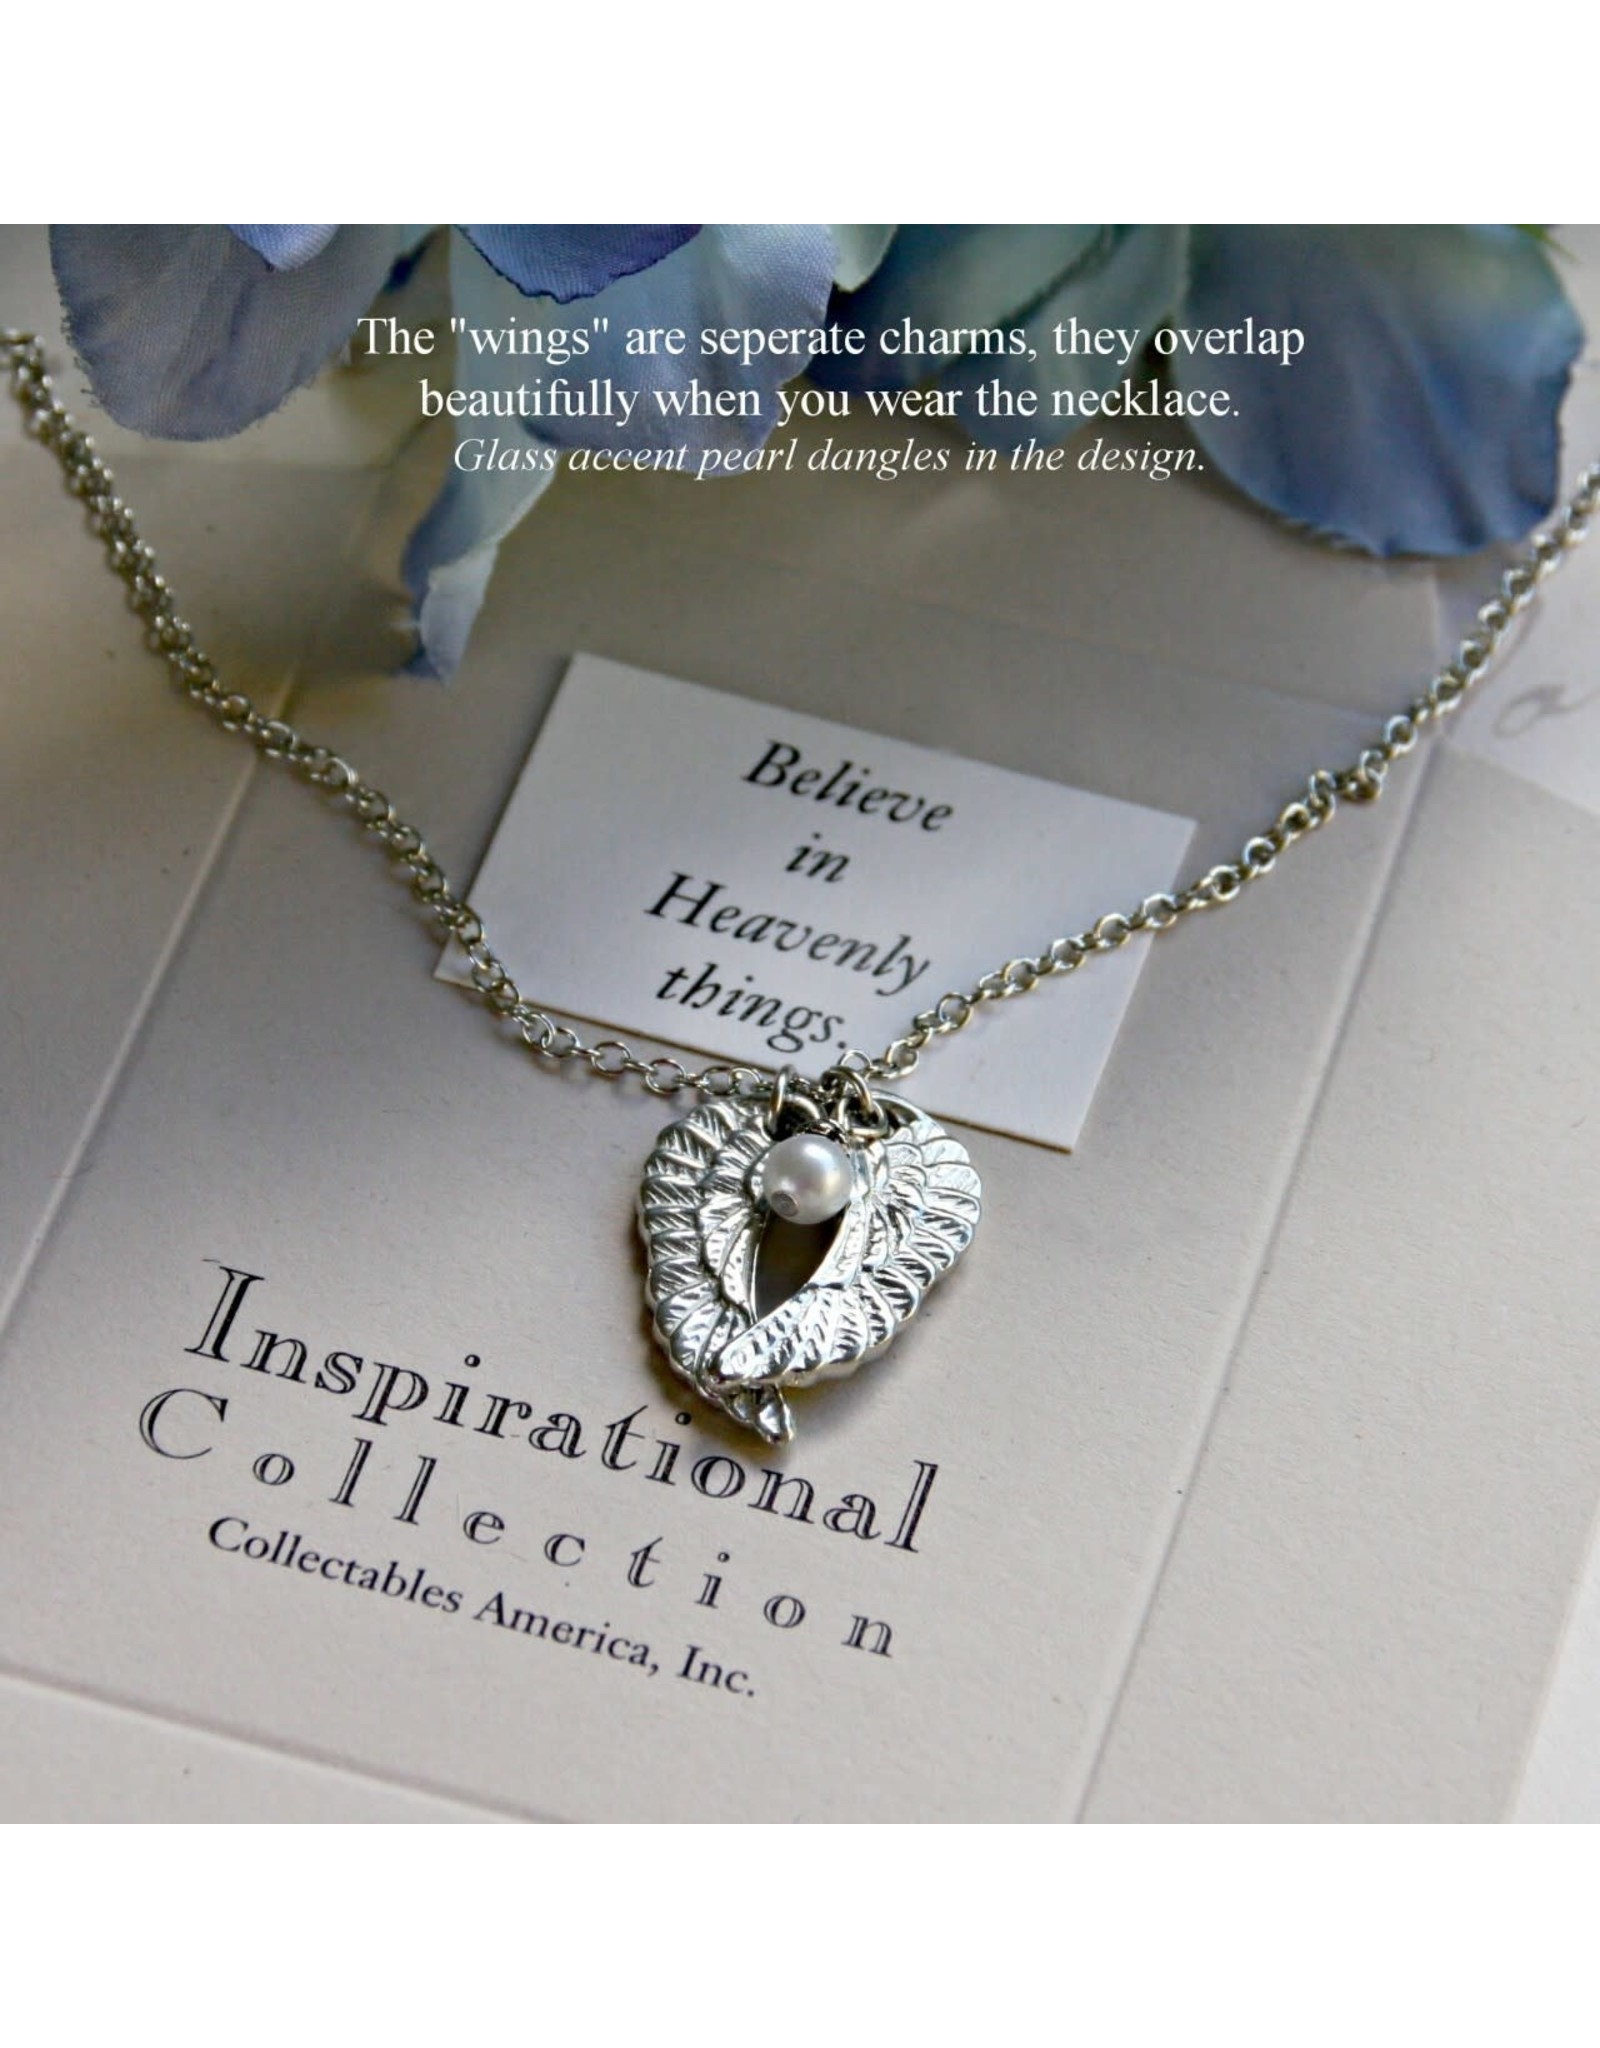 Collectables America the Studio Angel Wings Necklace, Believe in Heavenly Things